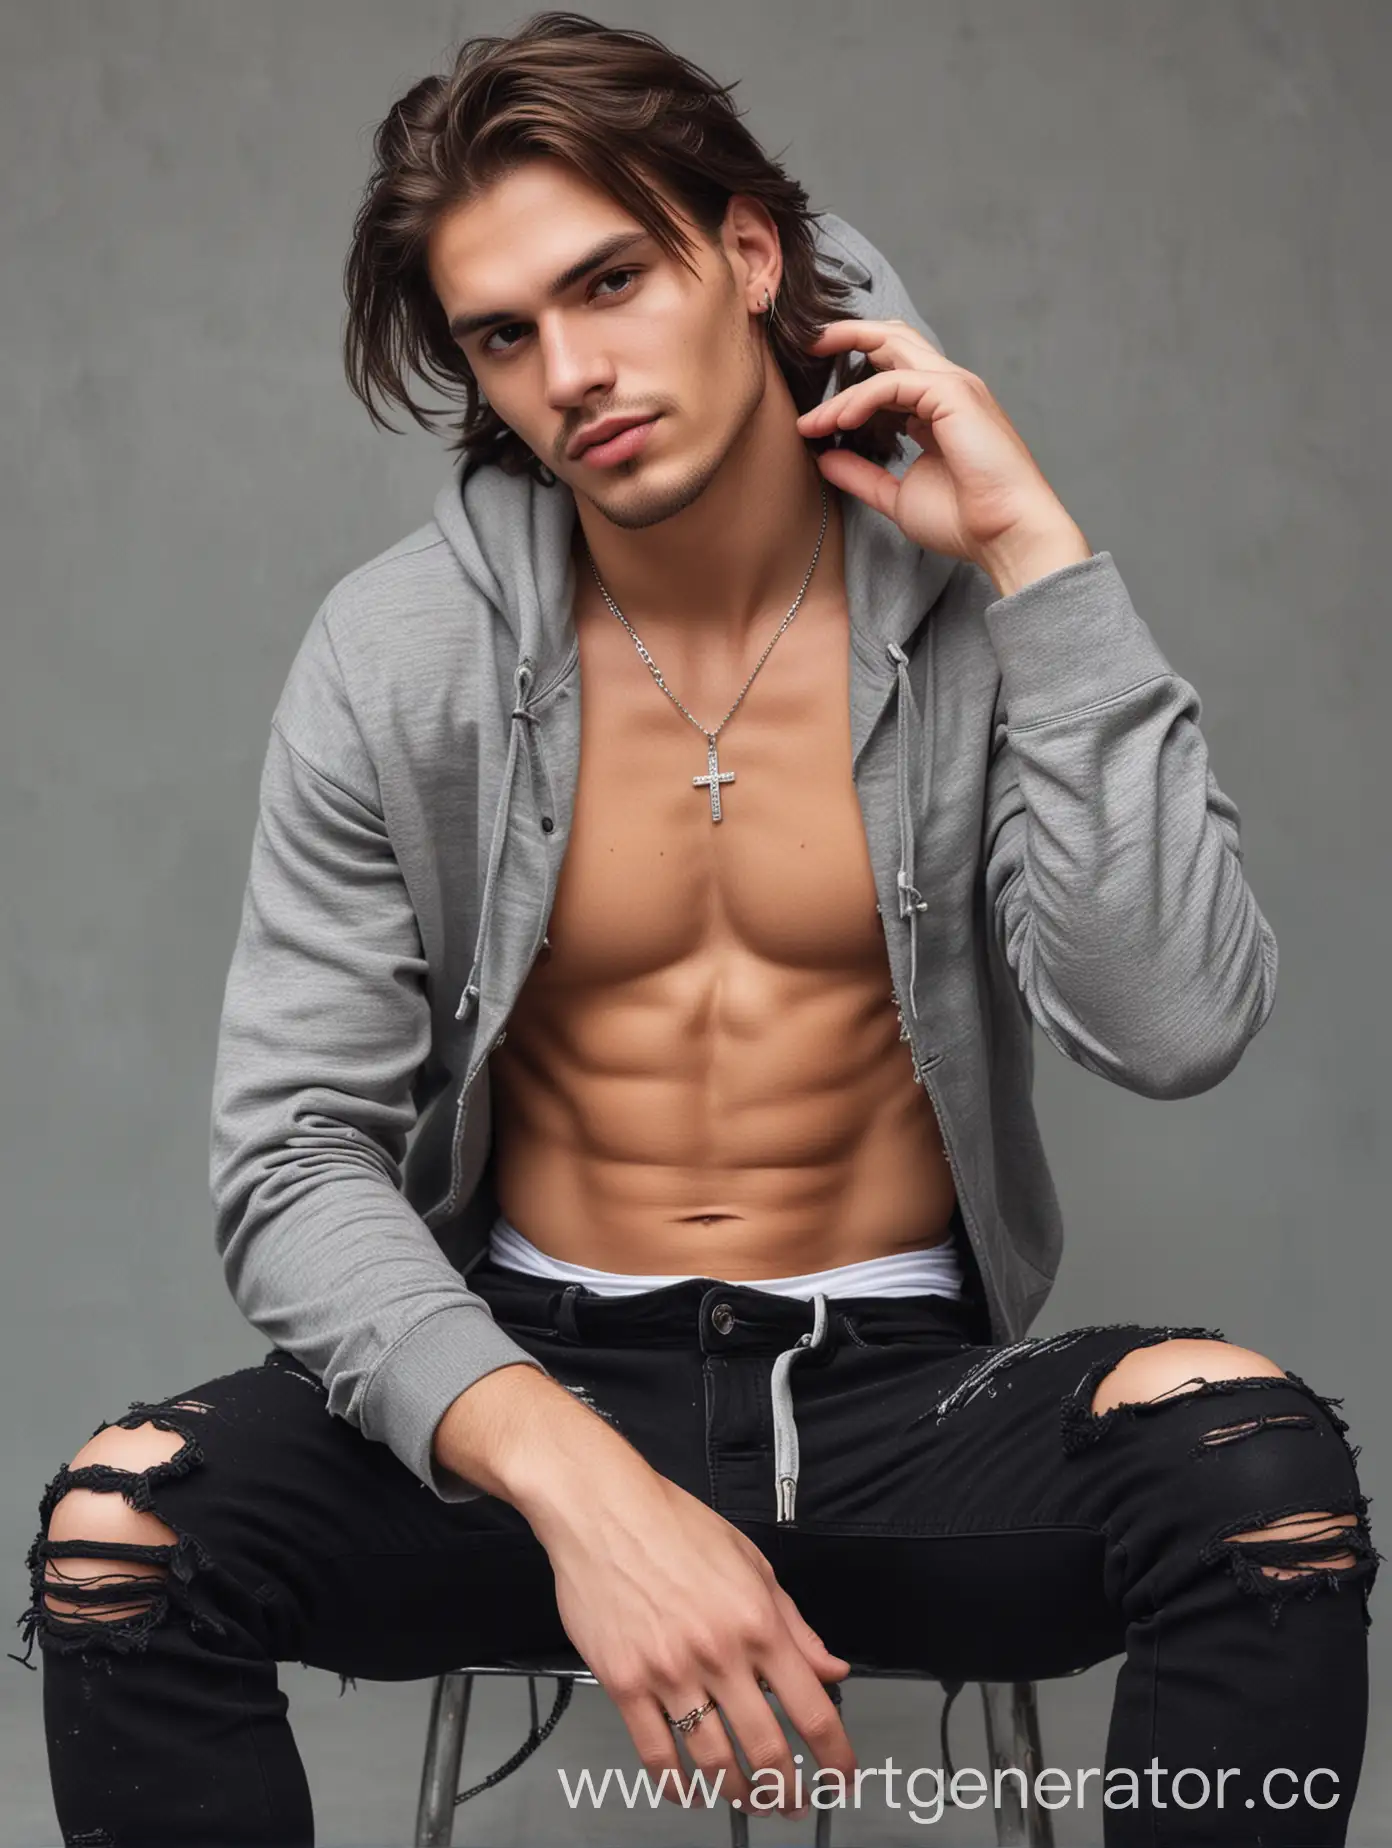 Trendy-Urban-Style-Pierced-Man-in-Black-Bodysuit-and-Ripped-Jeans